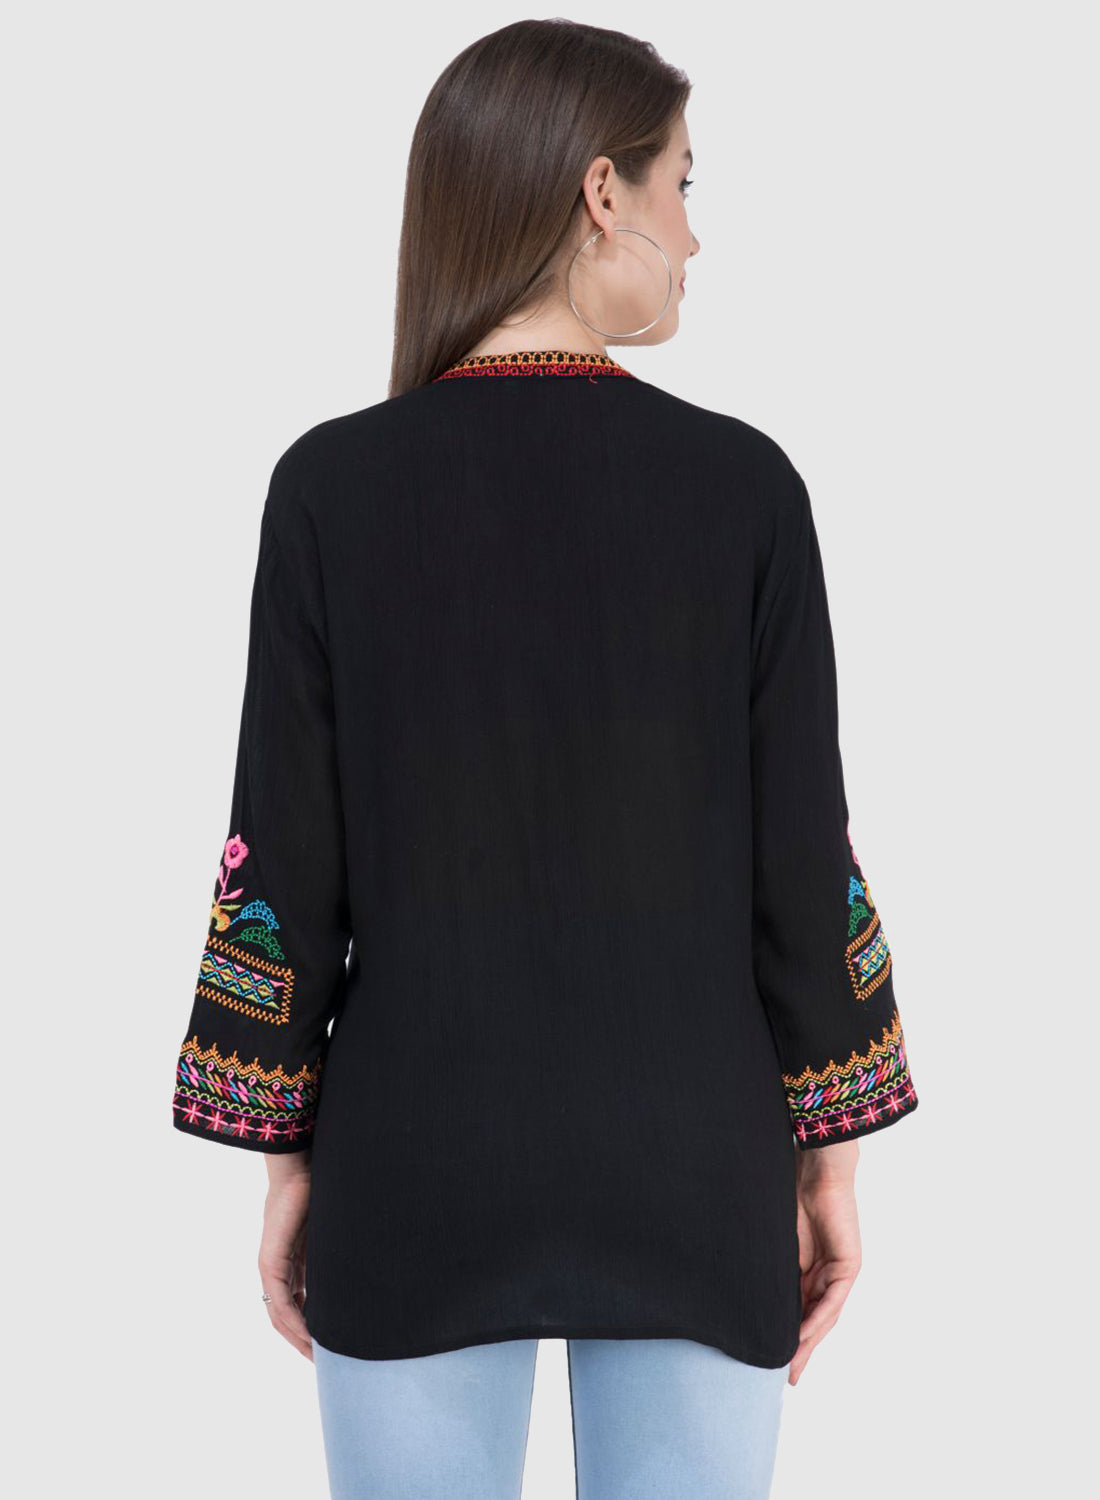 Women Top Black Rayon Crepe Party Wear 3/4 Sleeve Embroidery Work